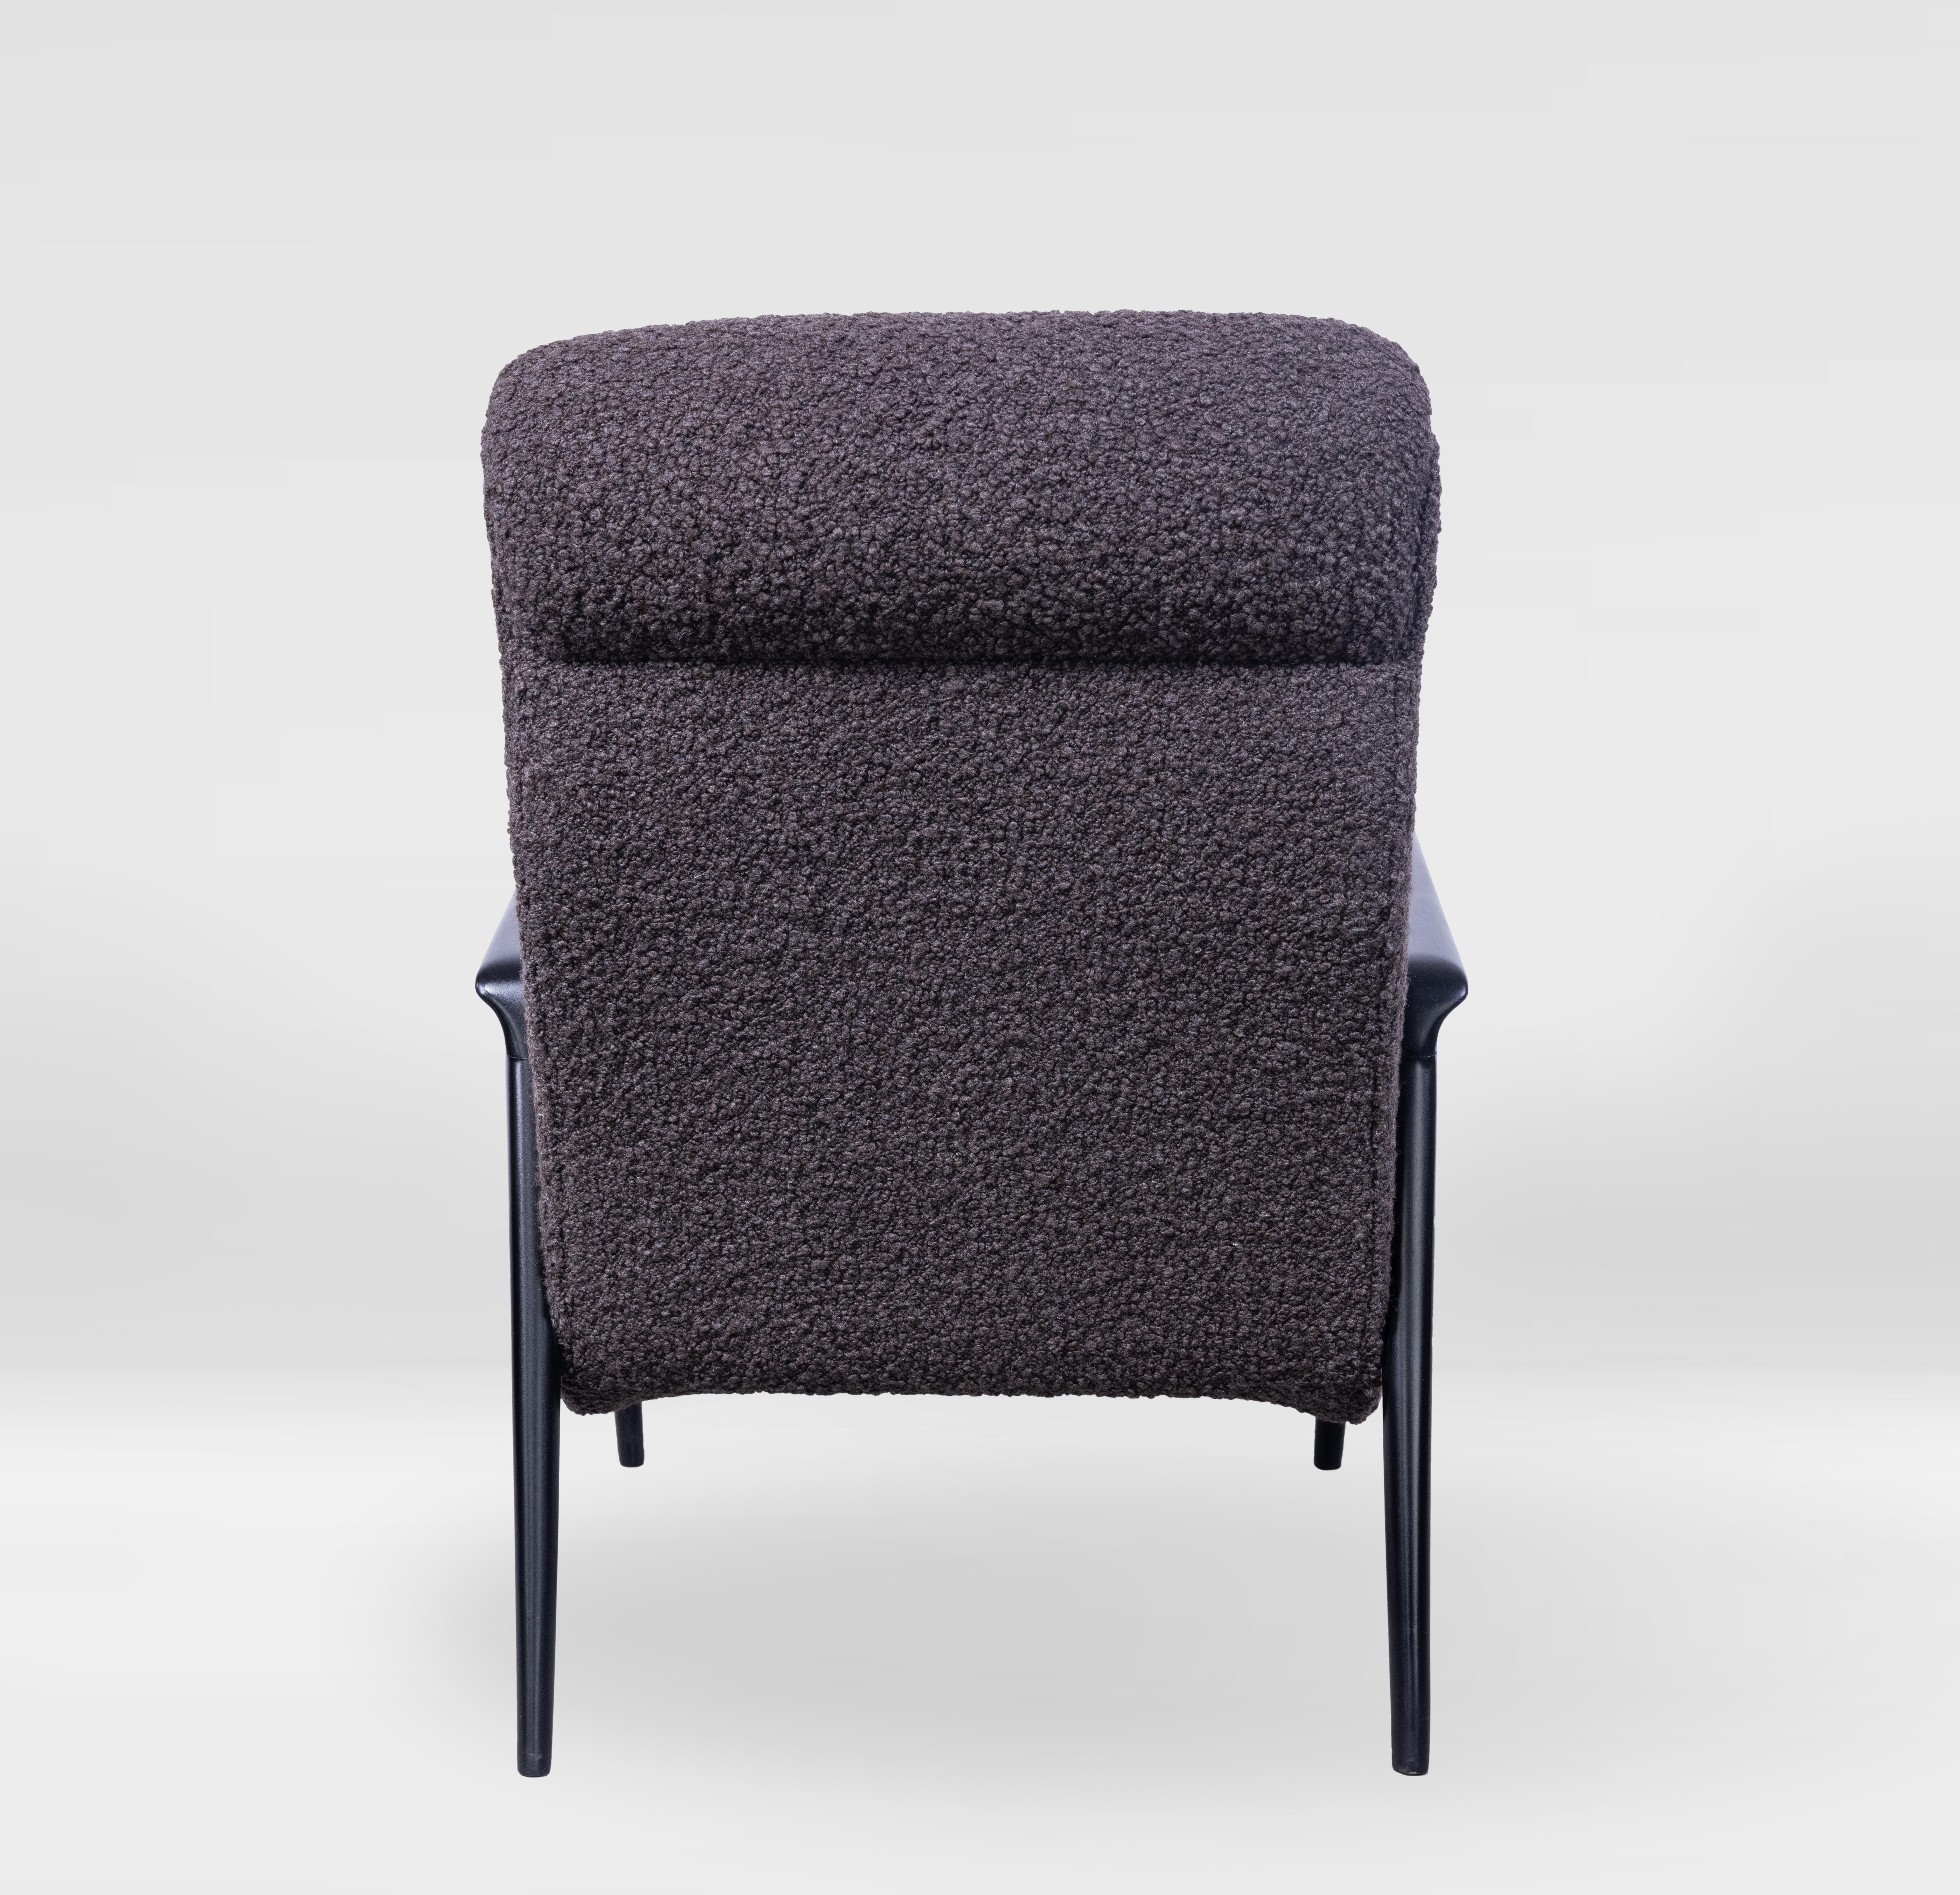 Guglielmo Veronesi Lounge Chair, Italy 1950s, Reupholstered in Alpaca Boucle’ In Good Condition For Sale In Torino, Piemonte